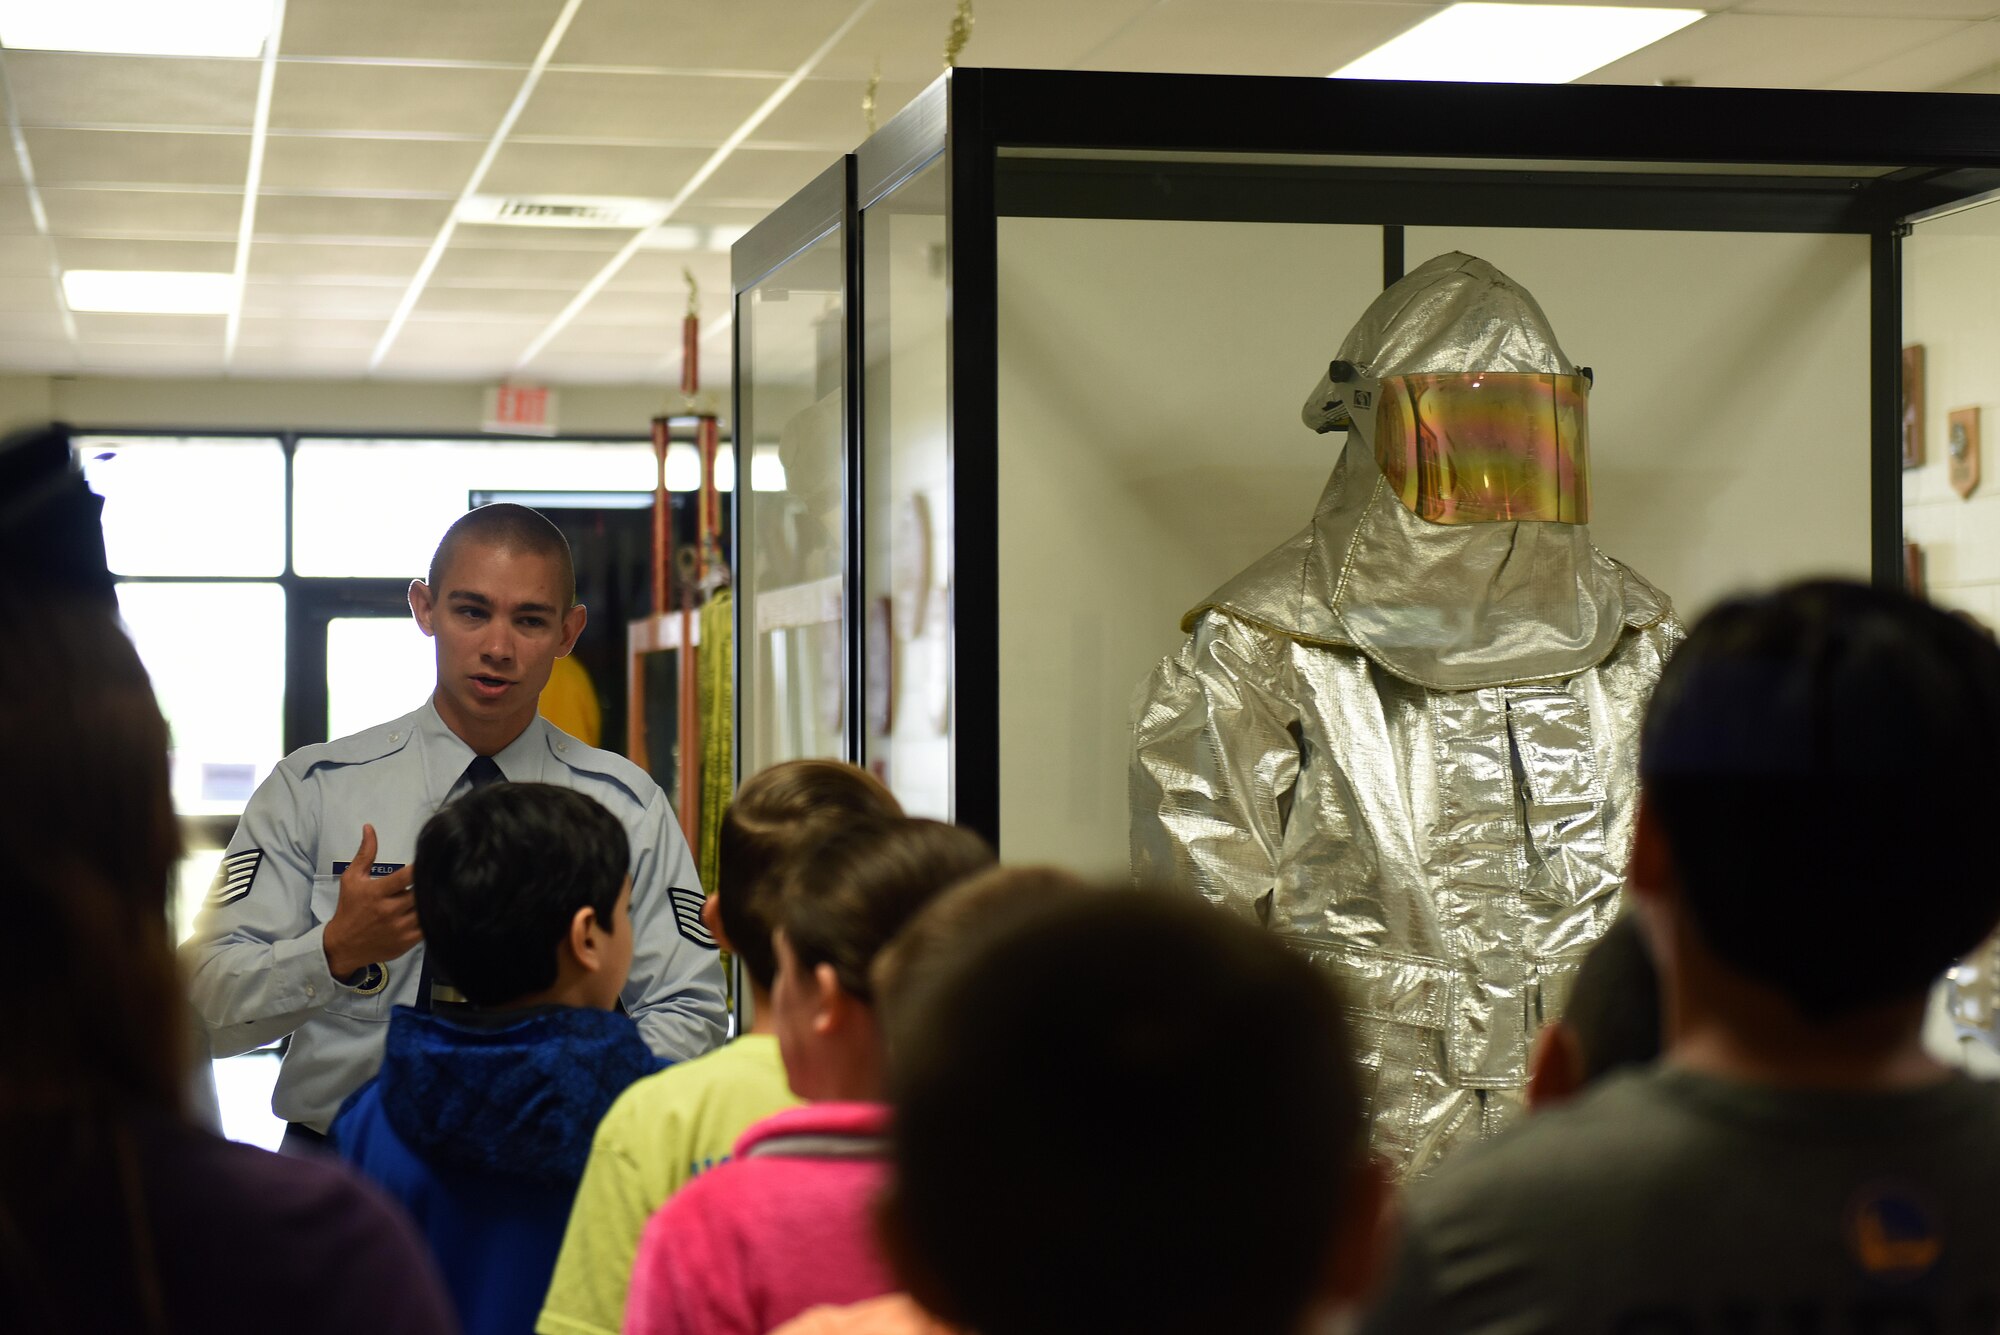 U.S. Air Force Tech. Sgt. Anthony Stanchfield, 312th Training Squadron instructor, tells Holliman guides children through the Louis F. Garland Department of Defense Fire Academy on Goodfellow Air Force Base, Texas, April 28, 2017. Stanchfield told the students about the importance of fire protection gear. (U.S. Air Force photo by Airman 1st Class Caelynn Ferguson/ Released)